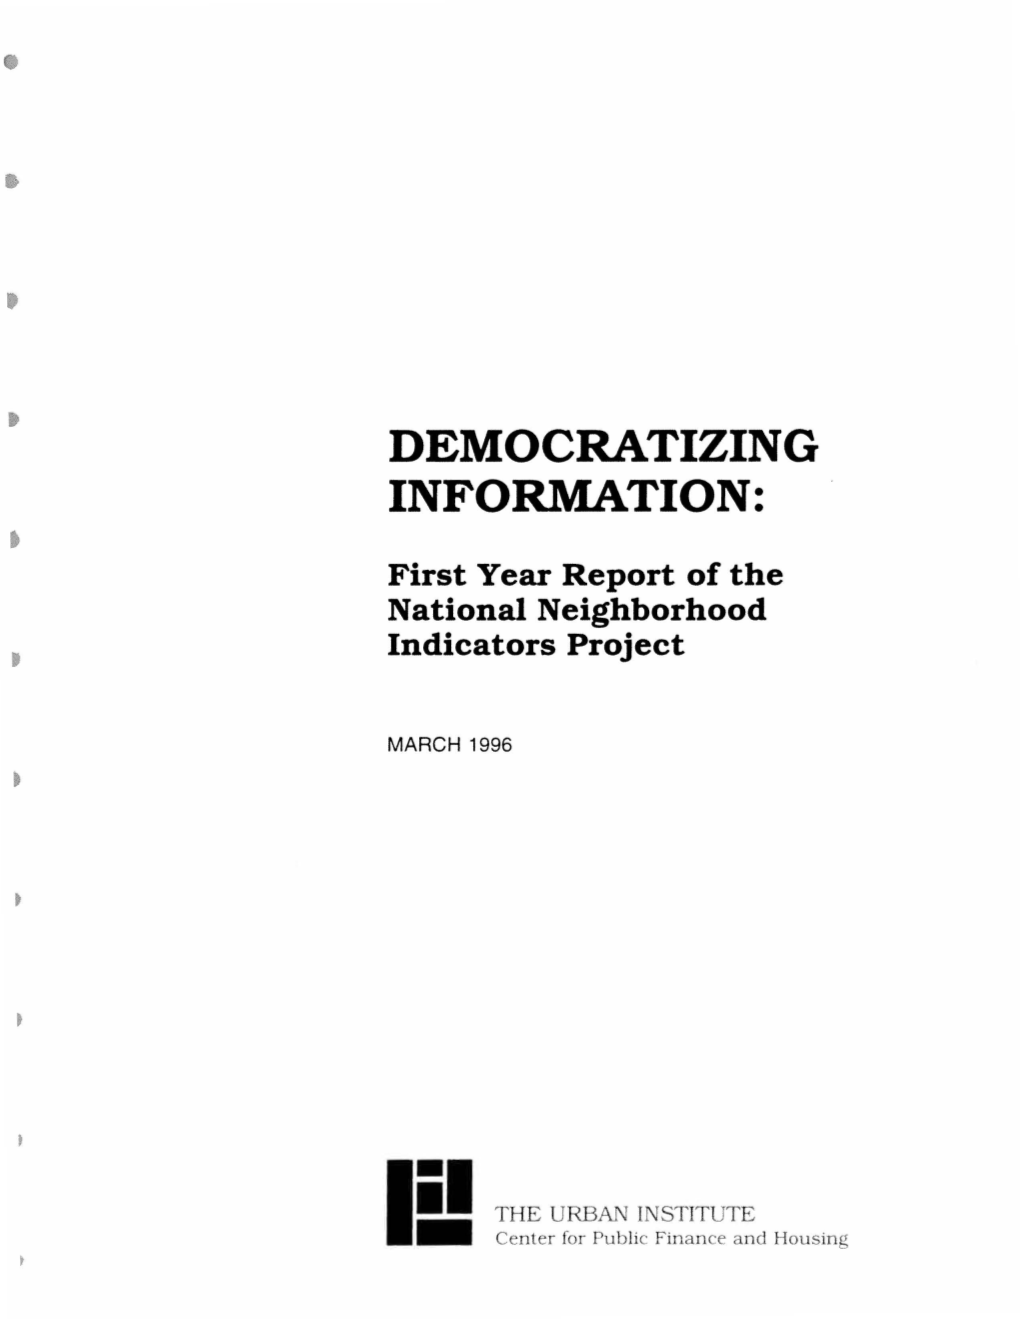 Democratizing Information: First Year Report of the National